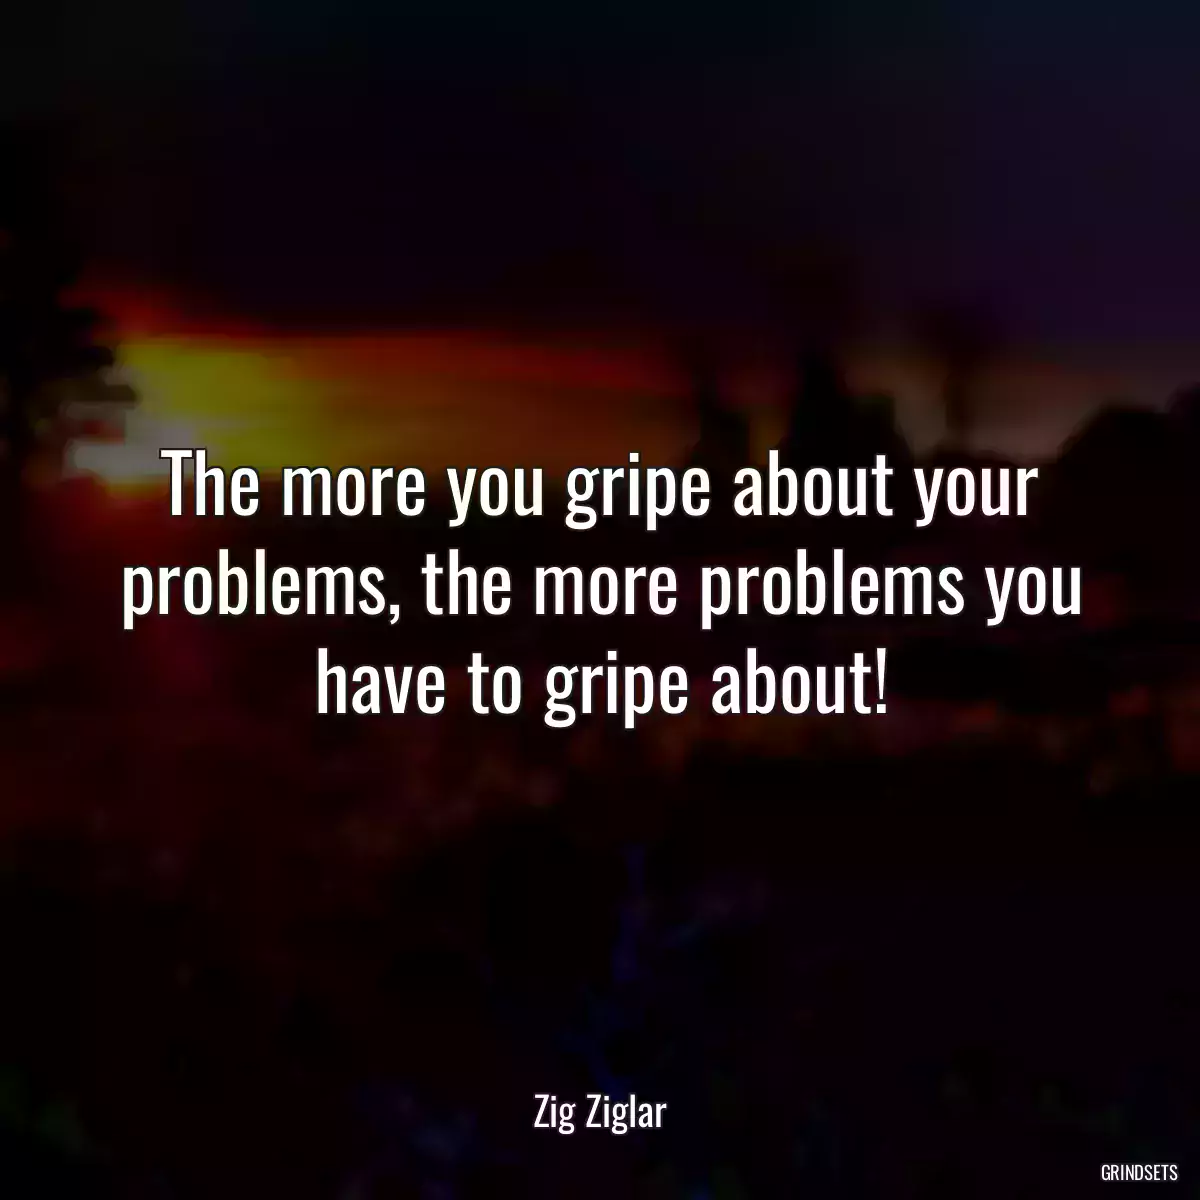 The more you gripe about your problems, the more problems you have to gripe about!